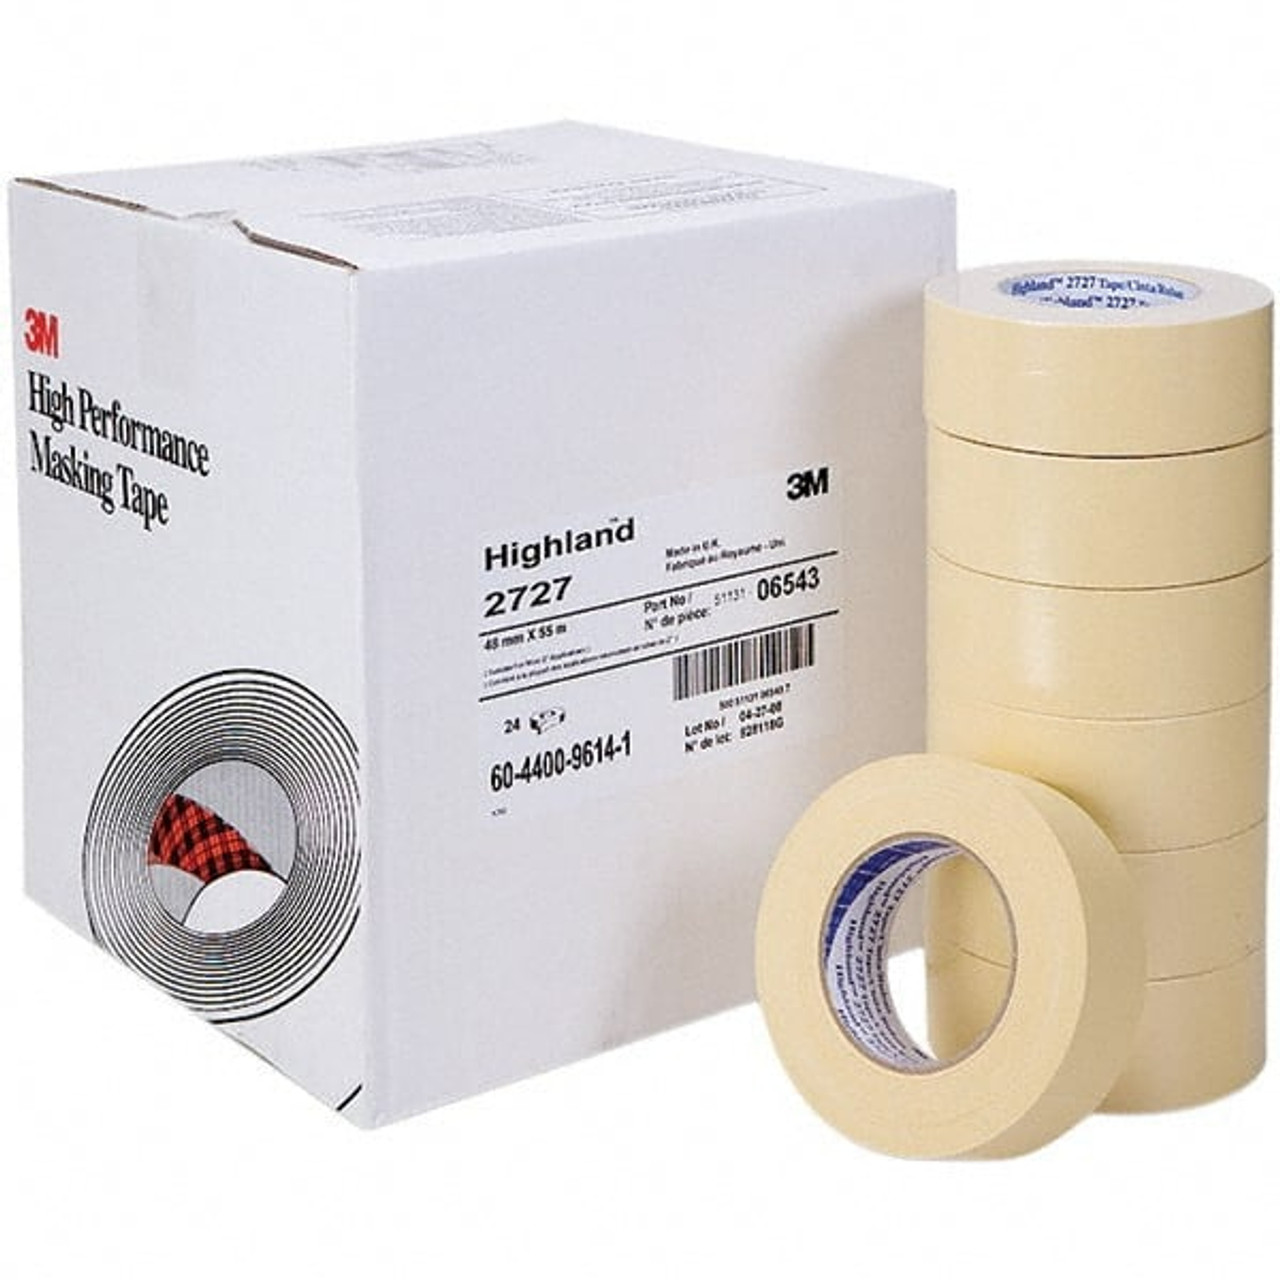 3M 2 Wide Masking/Painters Tape Rubber Adhesive 7000118481 - 06900120 -  Penn Tool Co., Inc